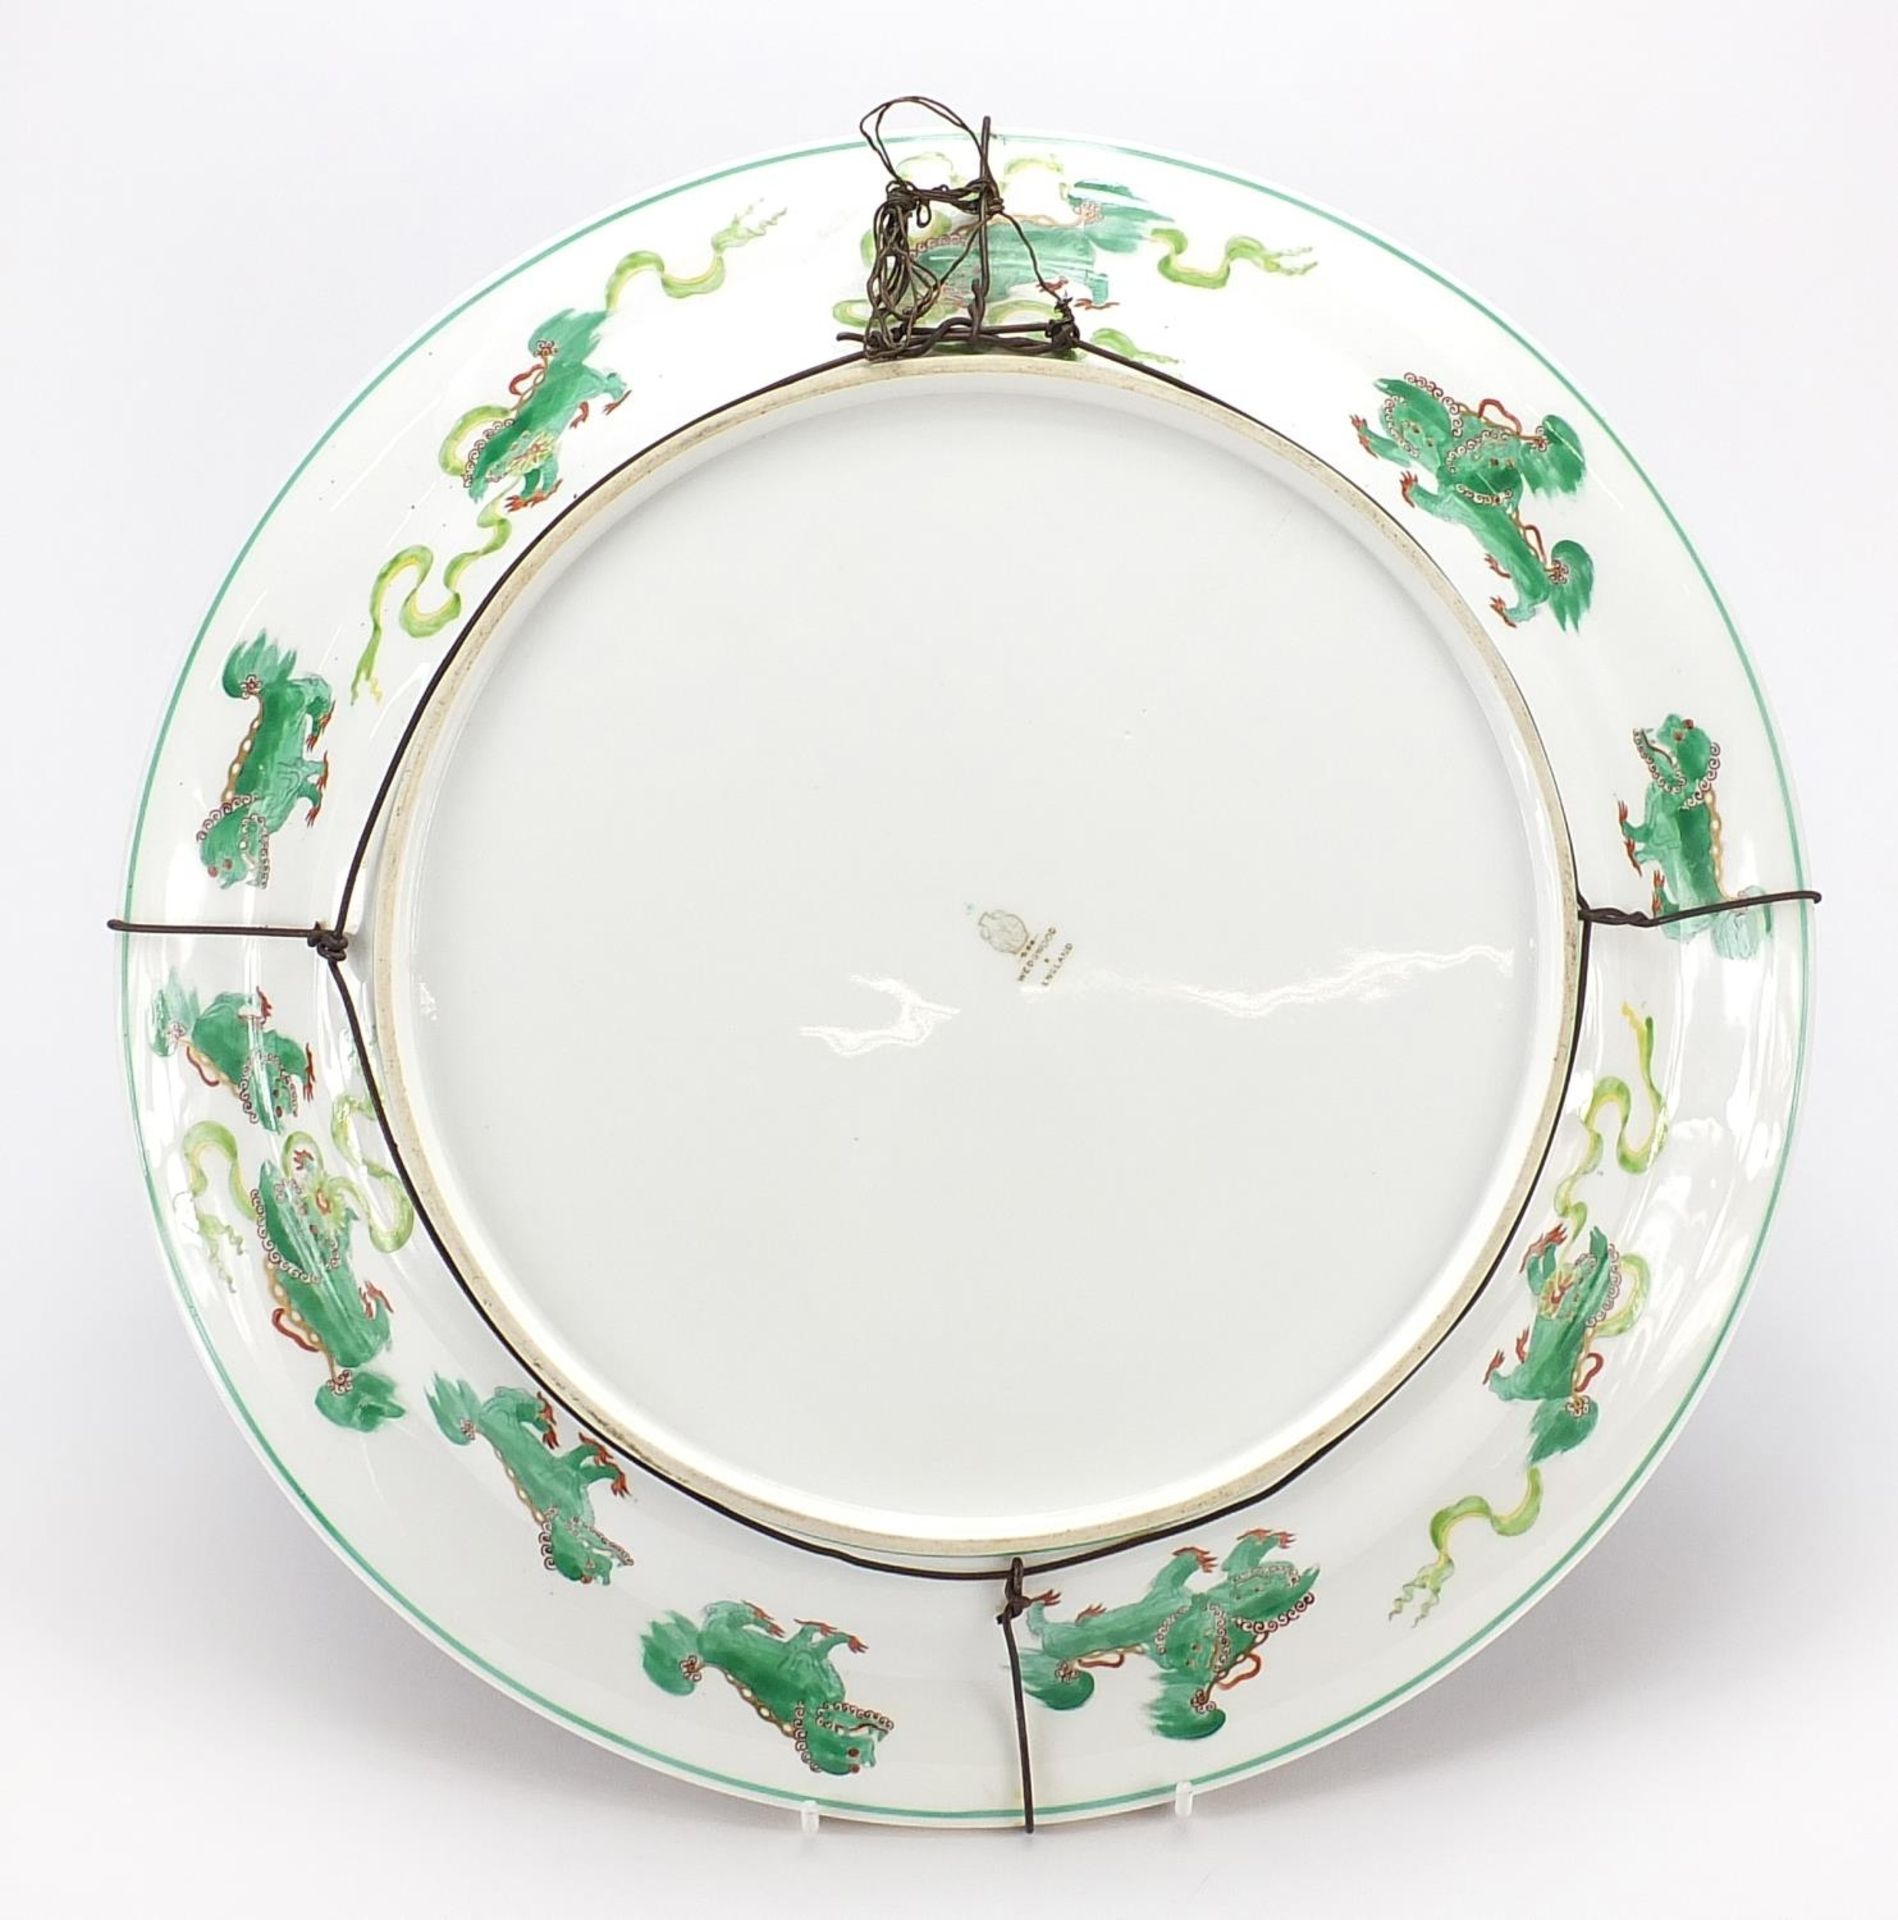 Wedgwood lustre charger hand painted with dragons, 38cm in diameter - Image 3 of 4